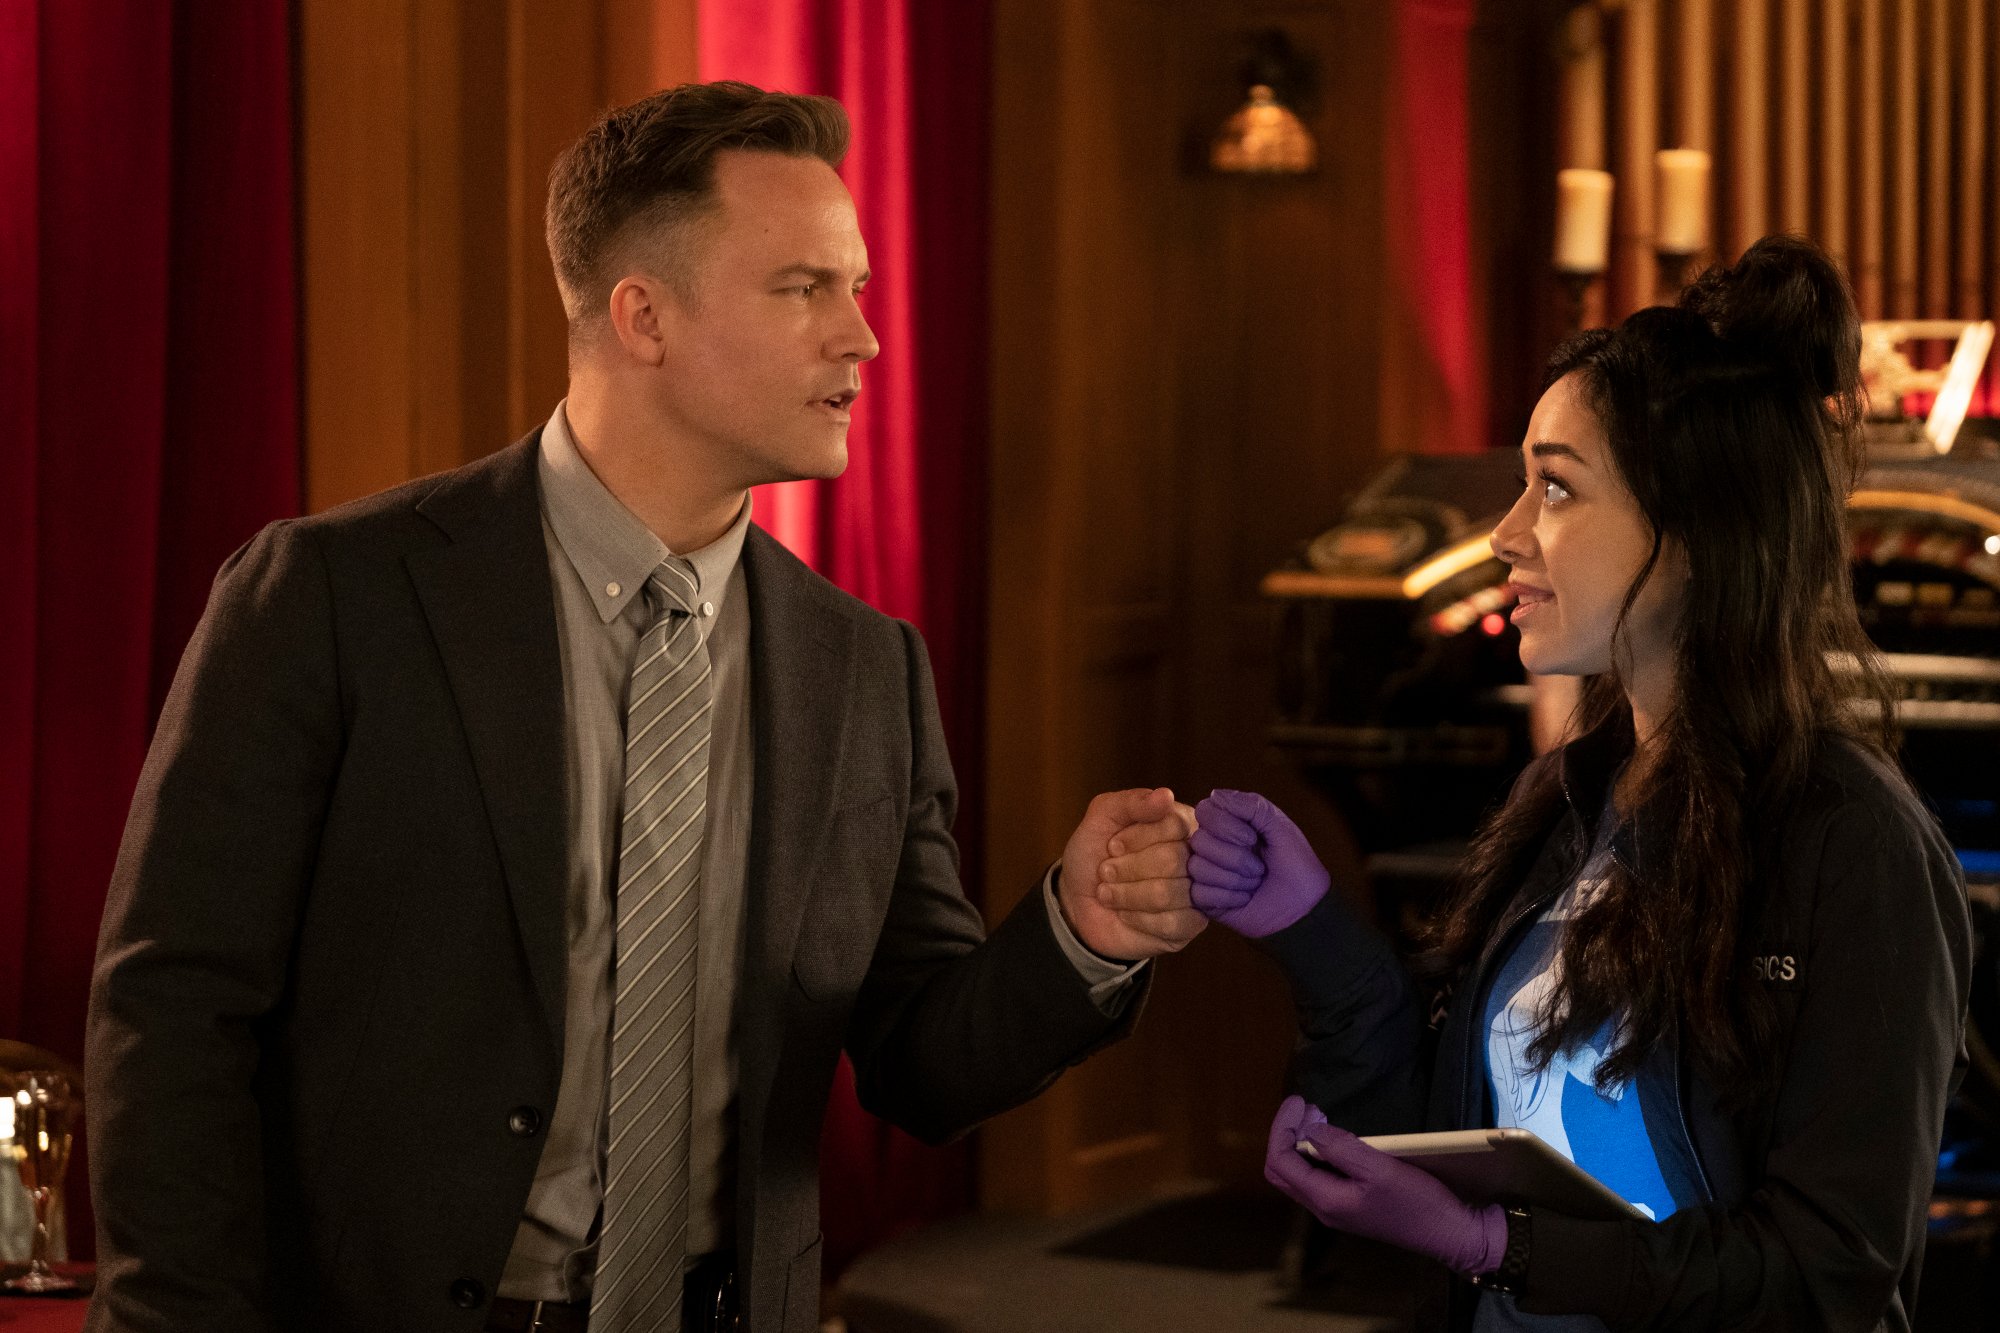 Scott Porter and Aimee Garcia as Carol and Ella in 'Lucifer' Season 6 on Netflix. They're awkwardly fist-bumping one another.